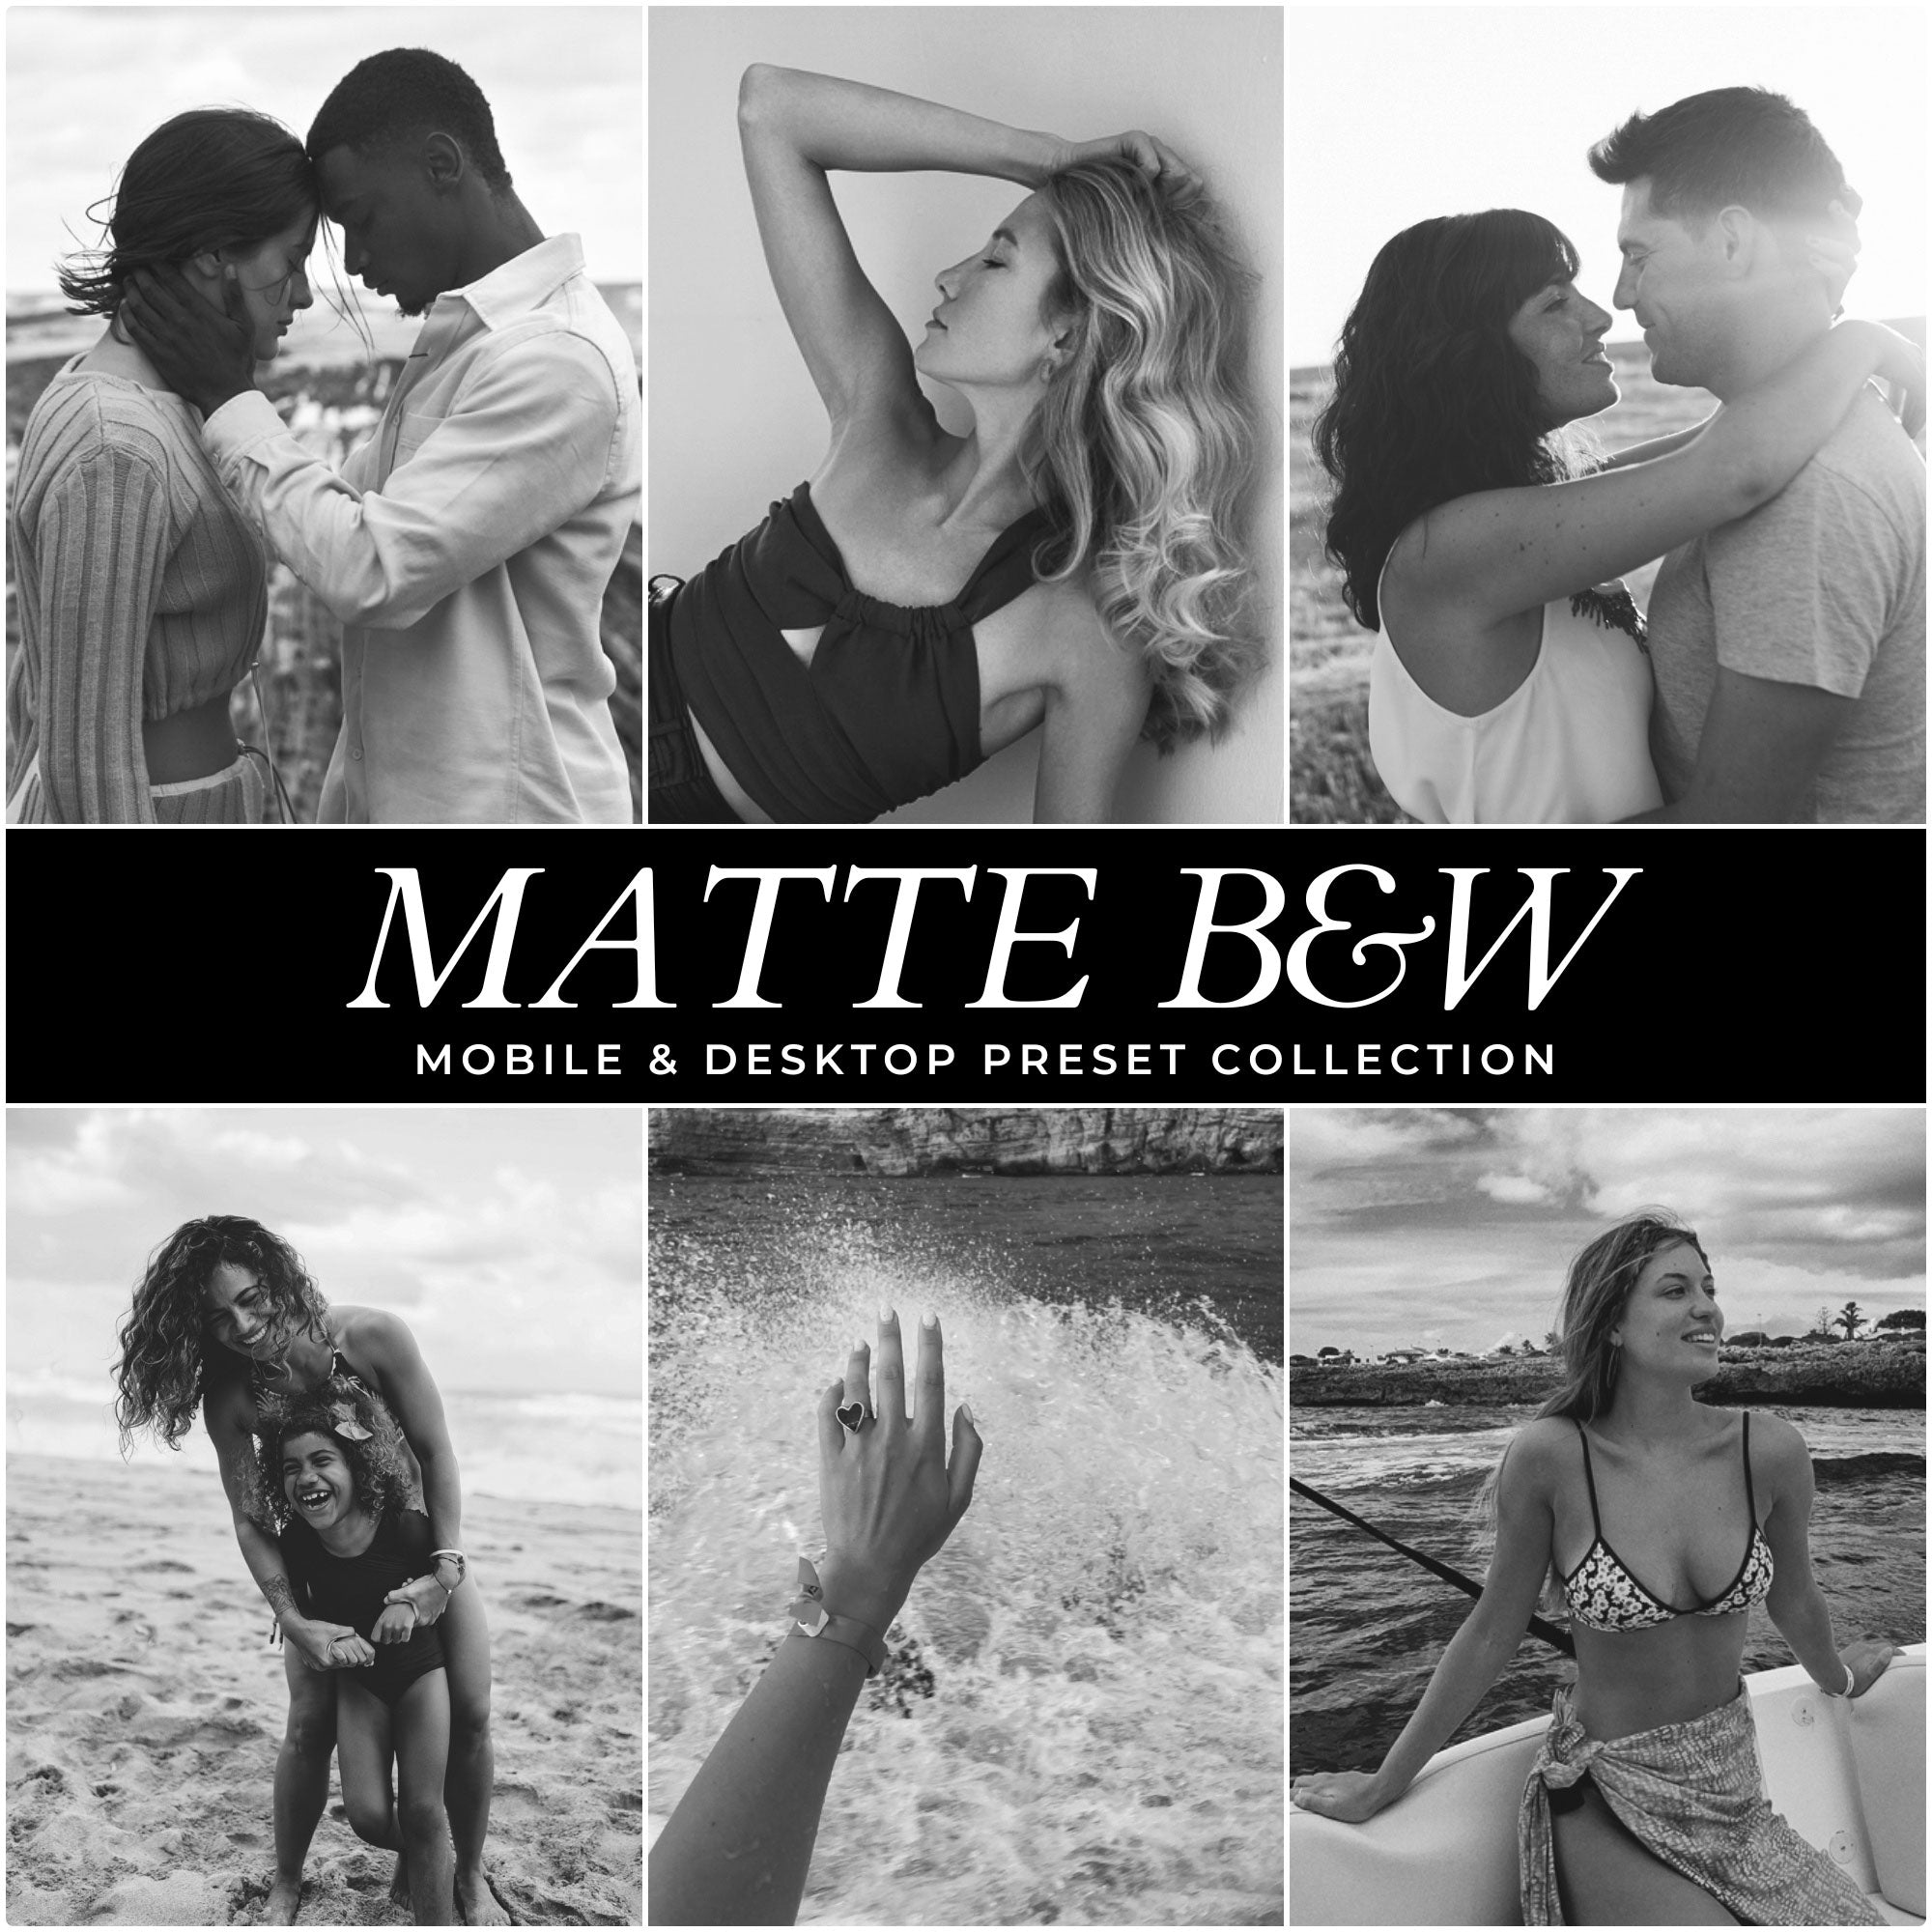 Matte Black And White Lightroom Presets For Photographers and Instagram Influencers Photo Editing In Adobe Lightroom By Lou And Marks Presets